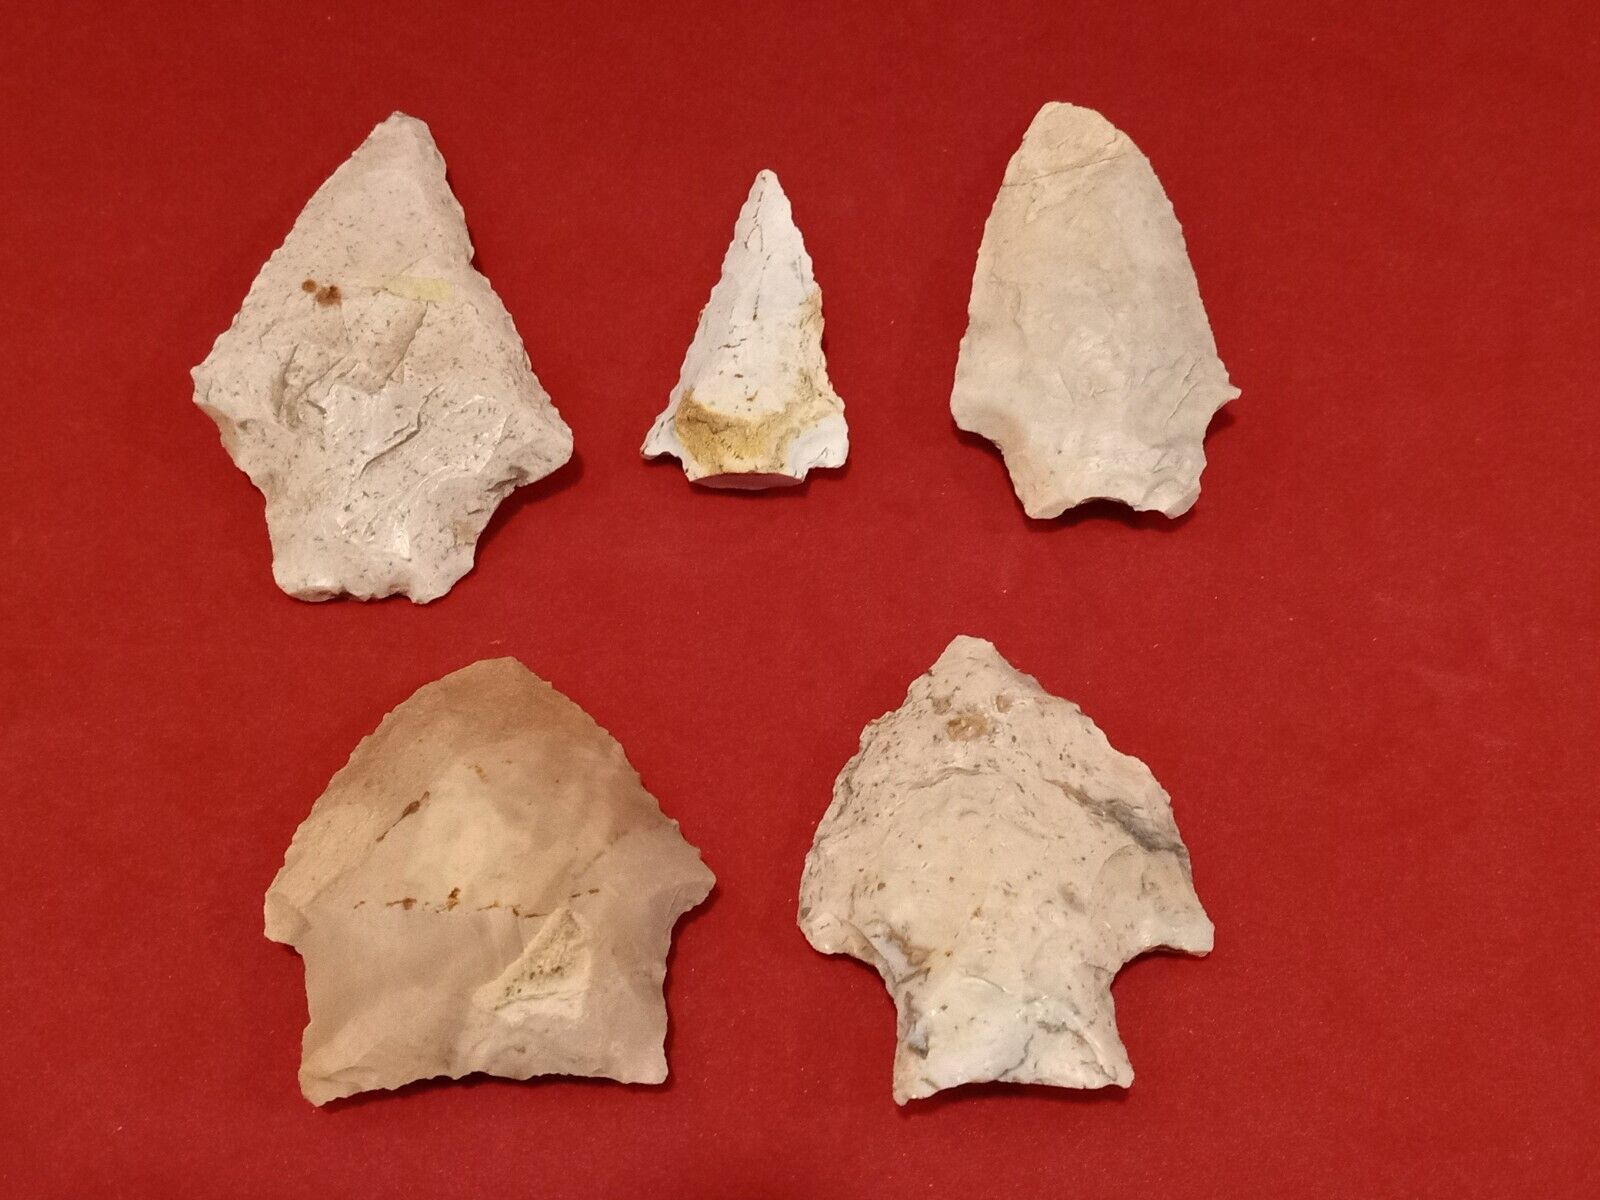 FIVE GEORGIA FIELD GRADE POINTS - SEMINOLE/EARLY COUNTIES - ALL LAND FINDS